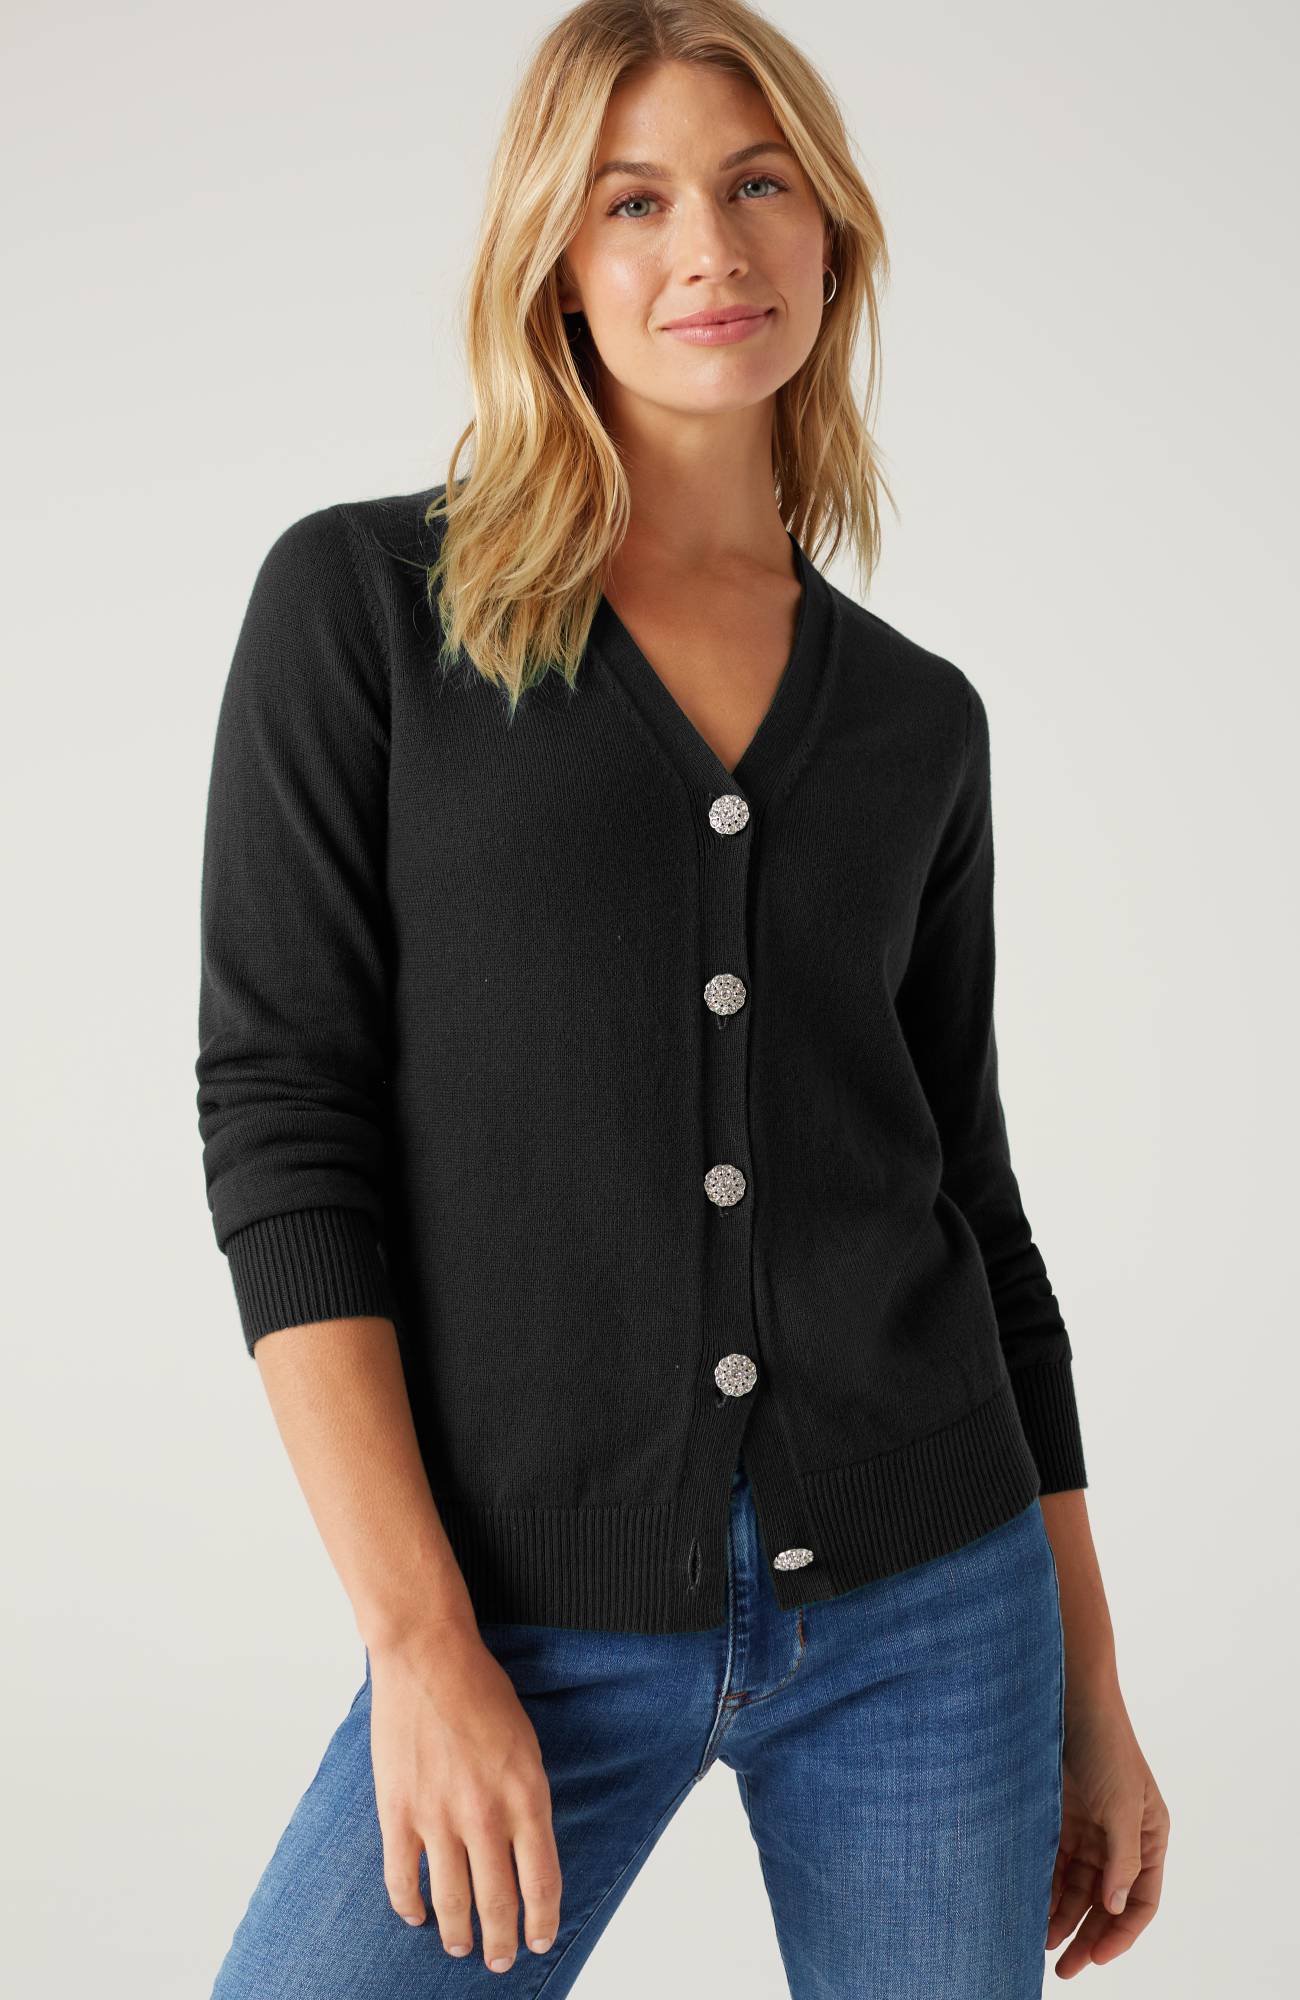 Bejeweled-Buttons Cardi